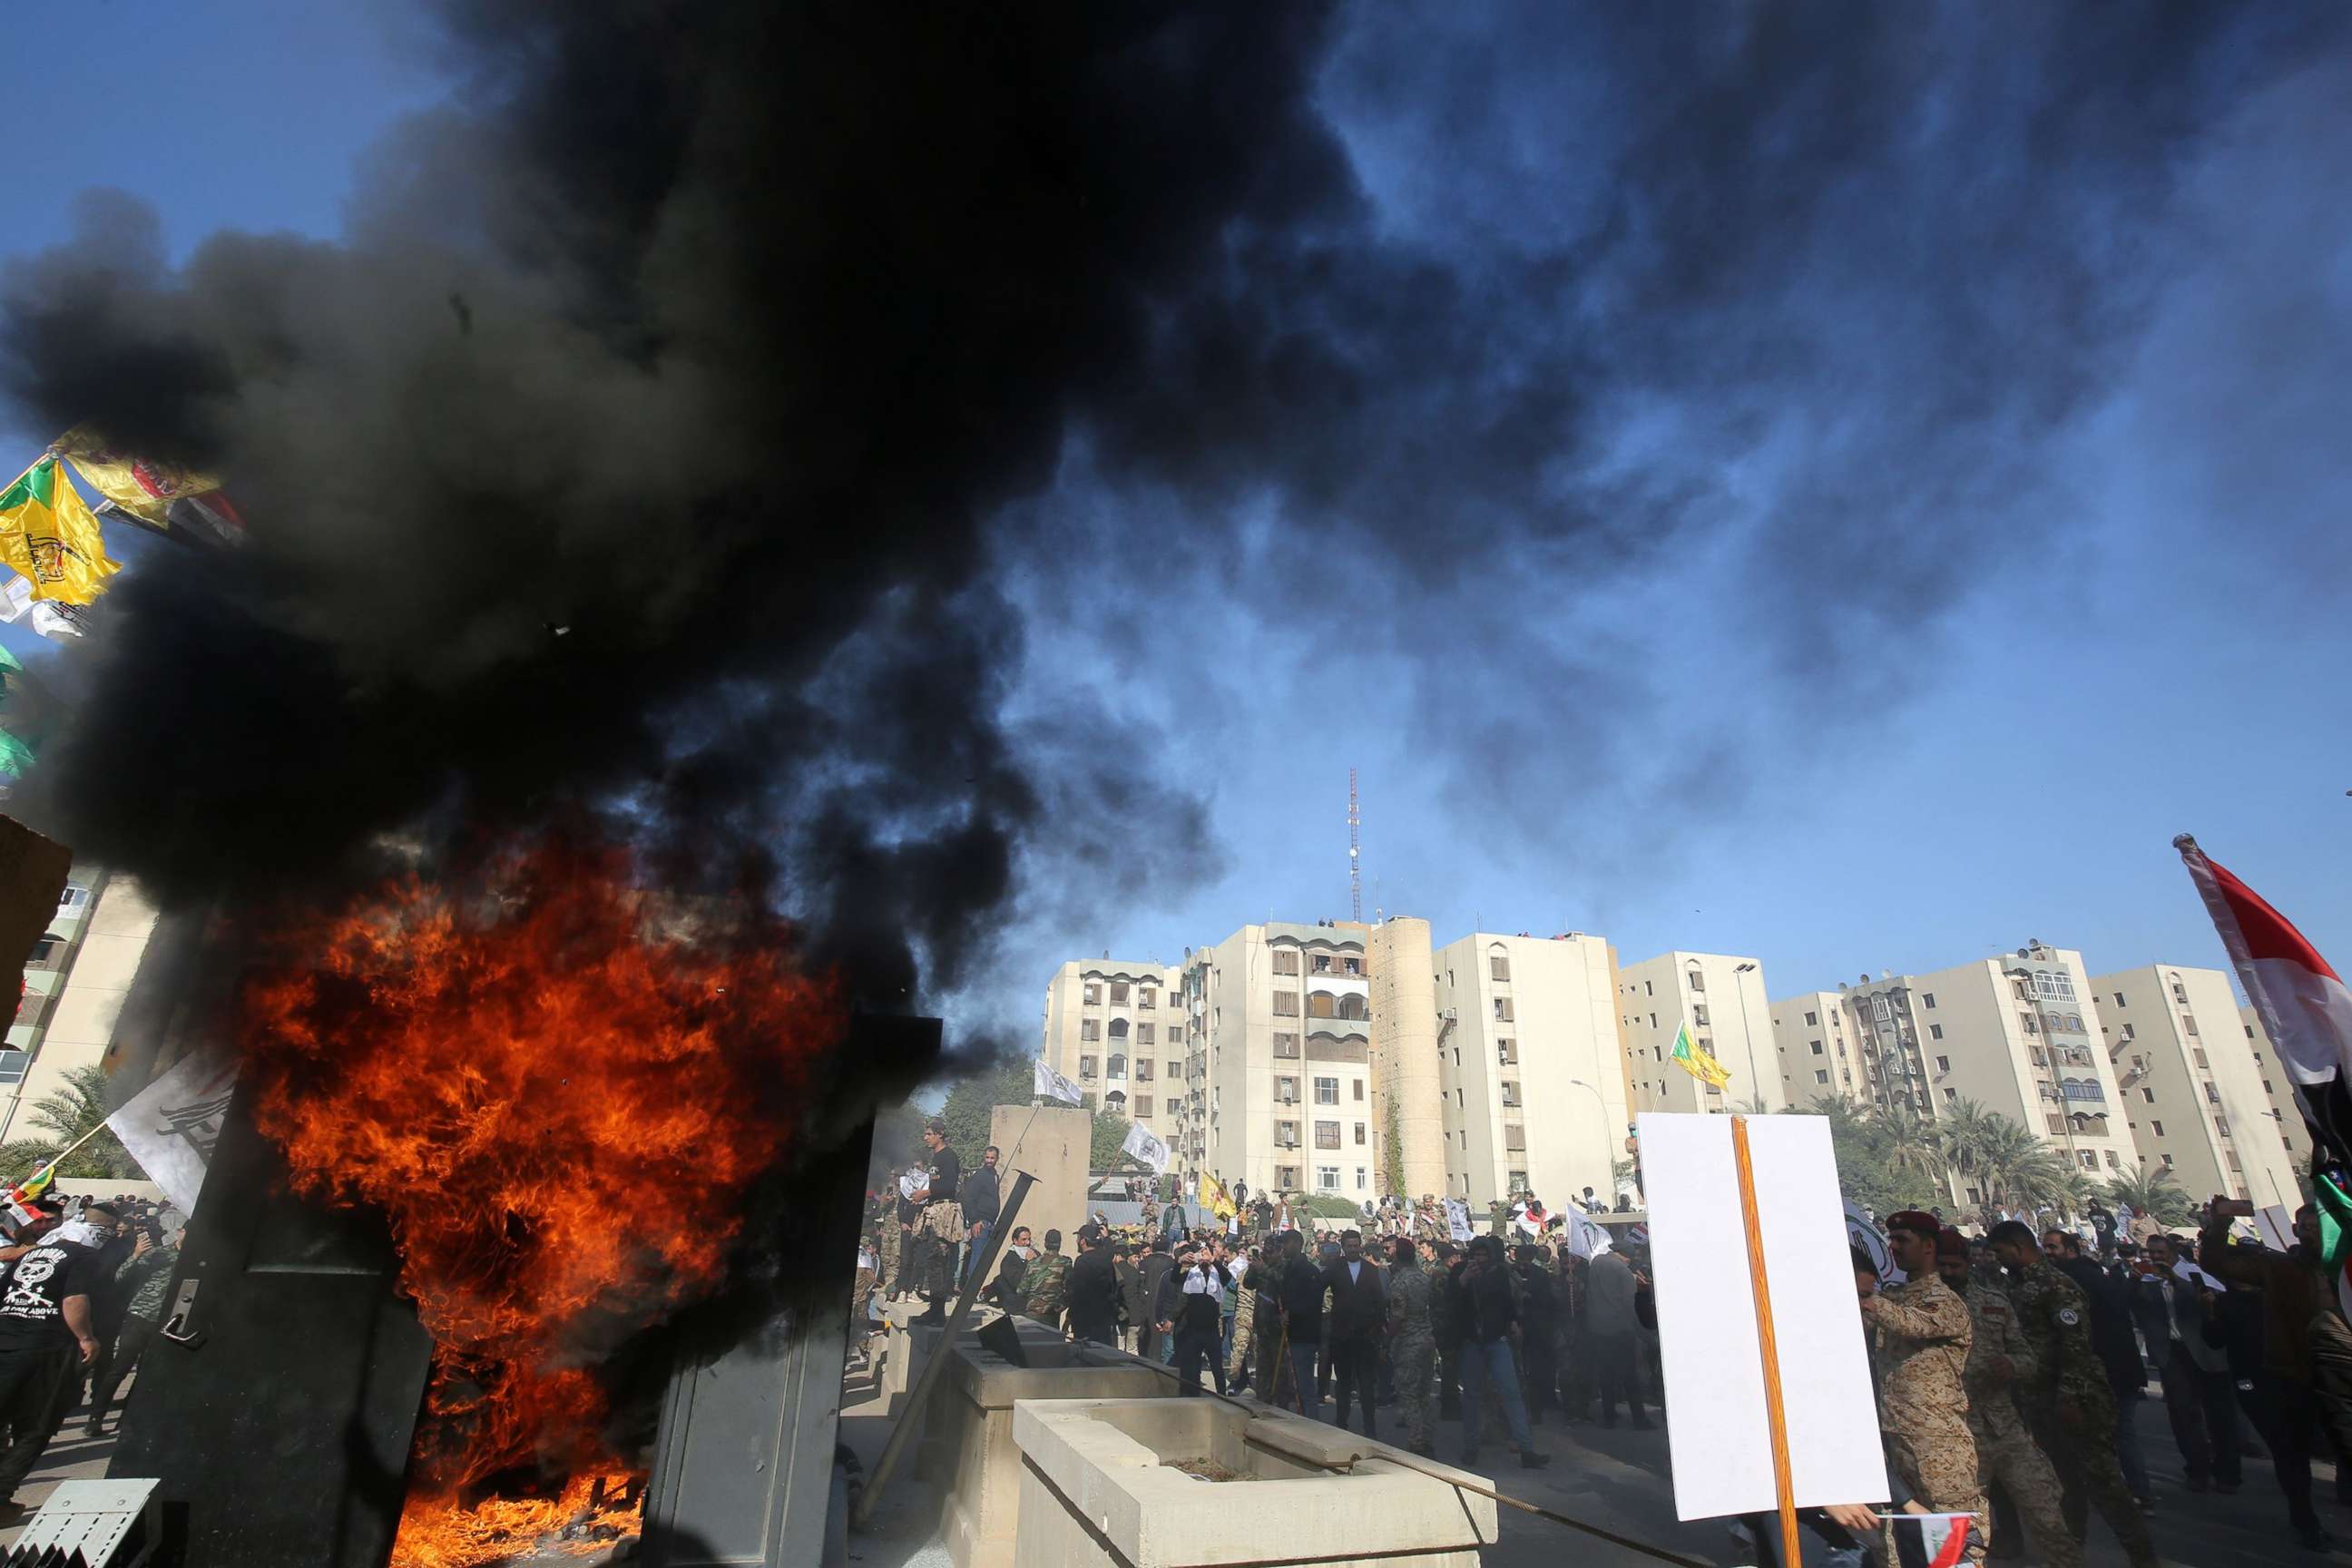 PHOTO: Iraqi protesters set ablaze a sentry box in front of the US embassy building in the capital Baghdad to protest against the weekend's air strikes by US planes on several bases, on December 31, 2019.